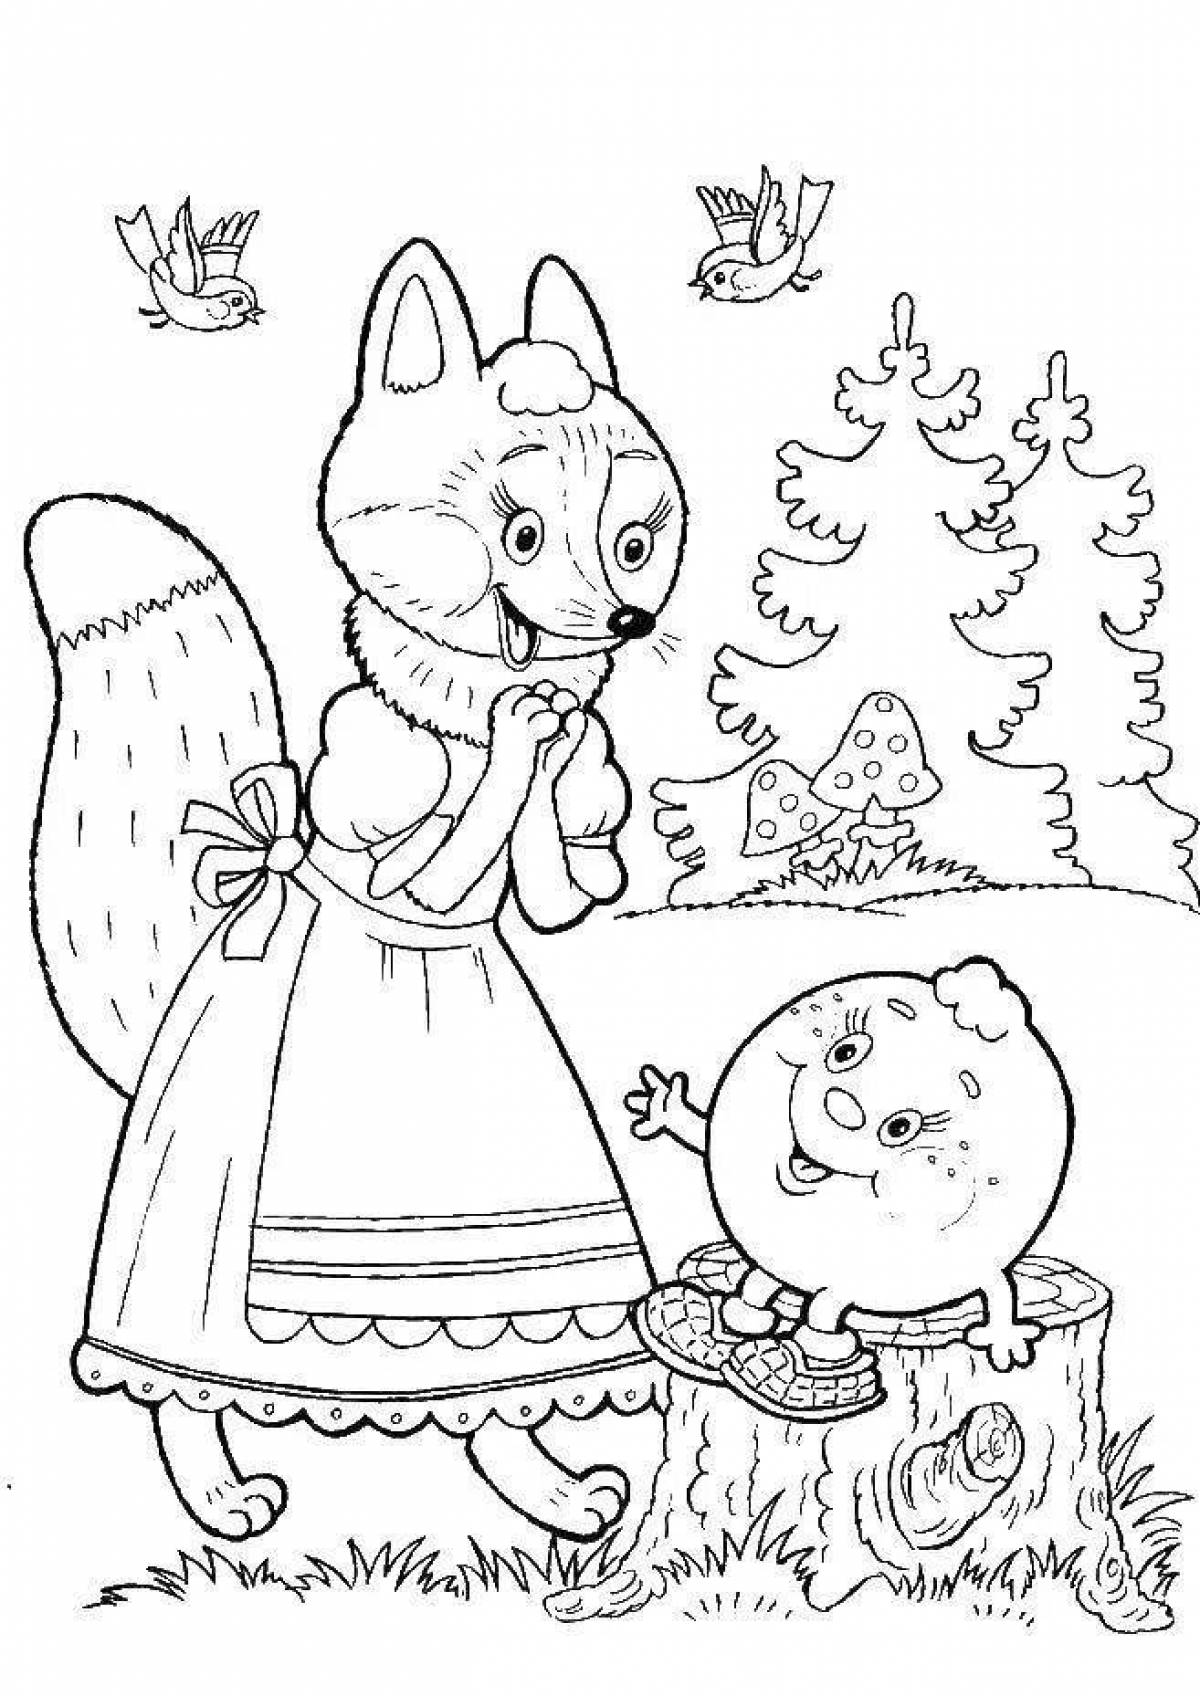 Outstanding coloring book visiting a fairy tale